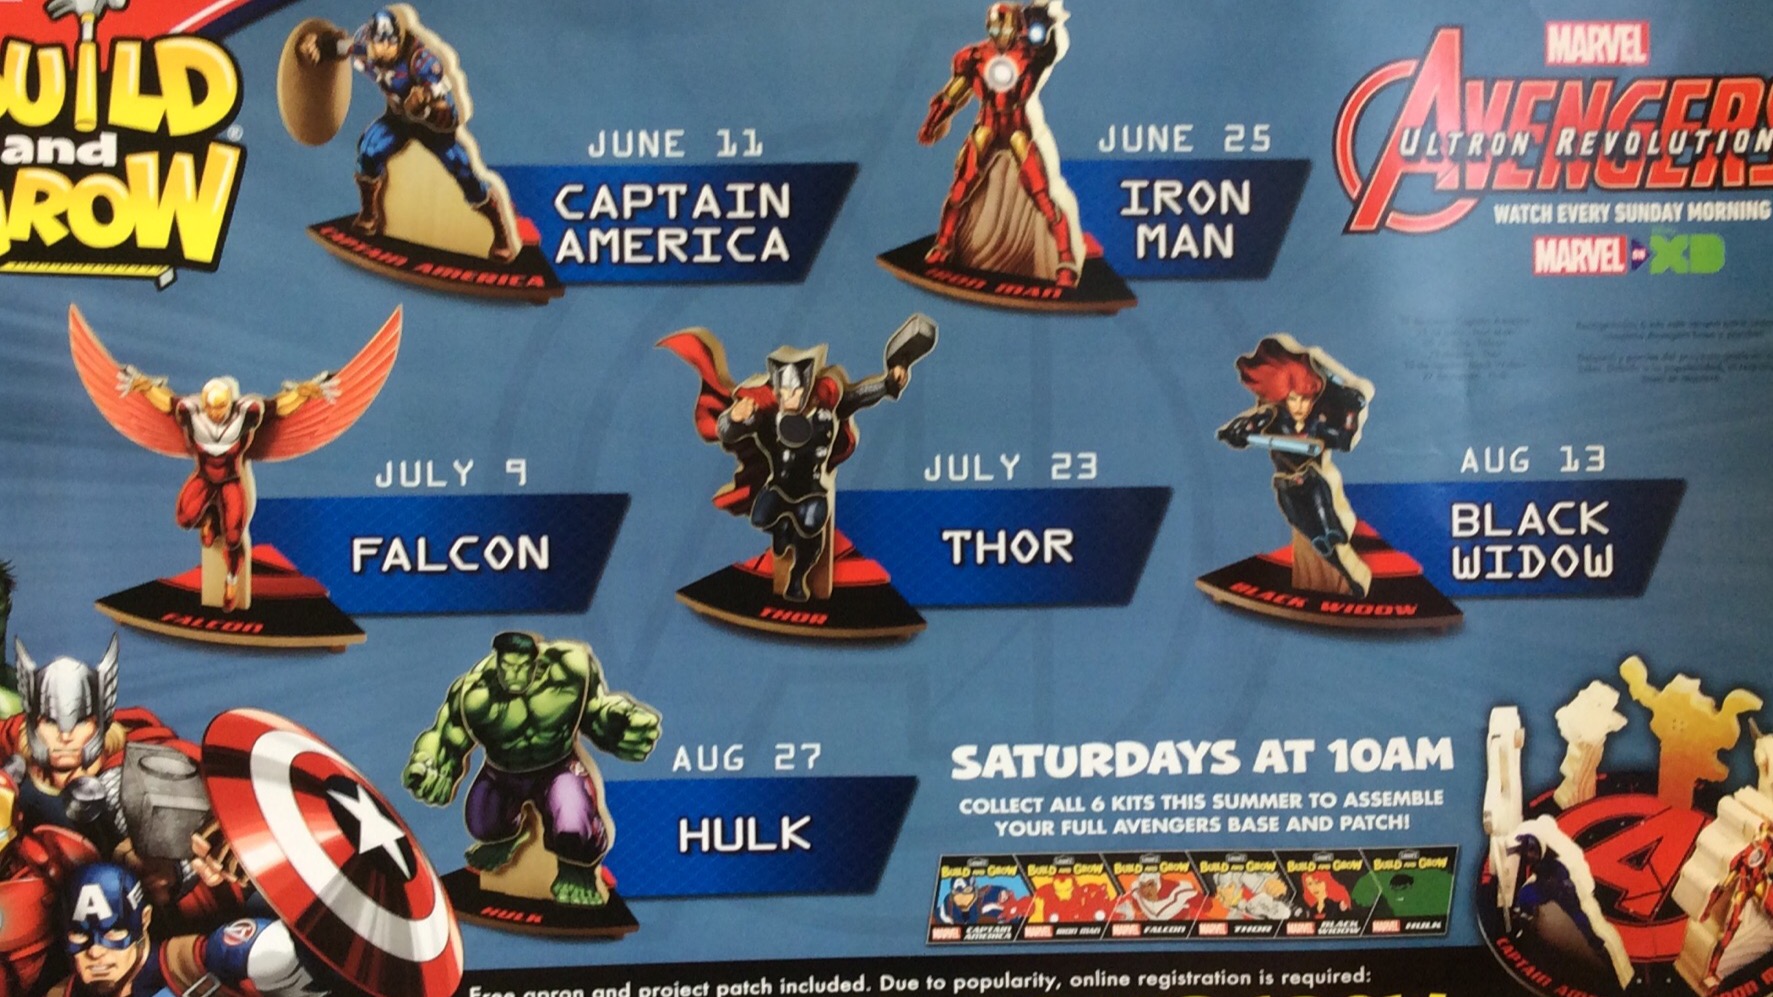 Lowes Build And Grow Schedule 2022 Lowe's Build And Grow | Build Captain America - Ship Saves